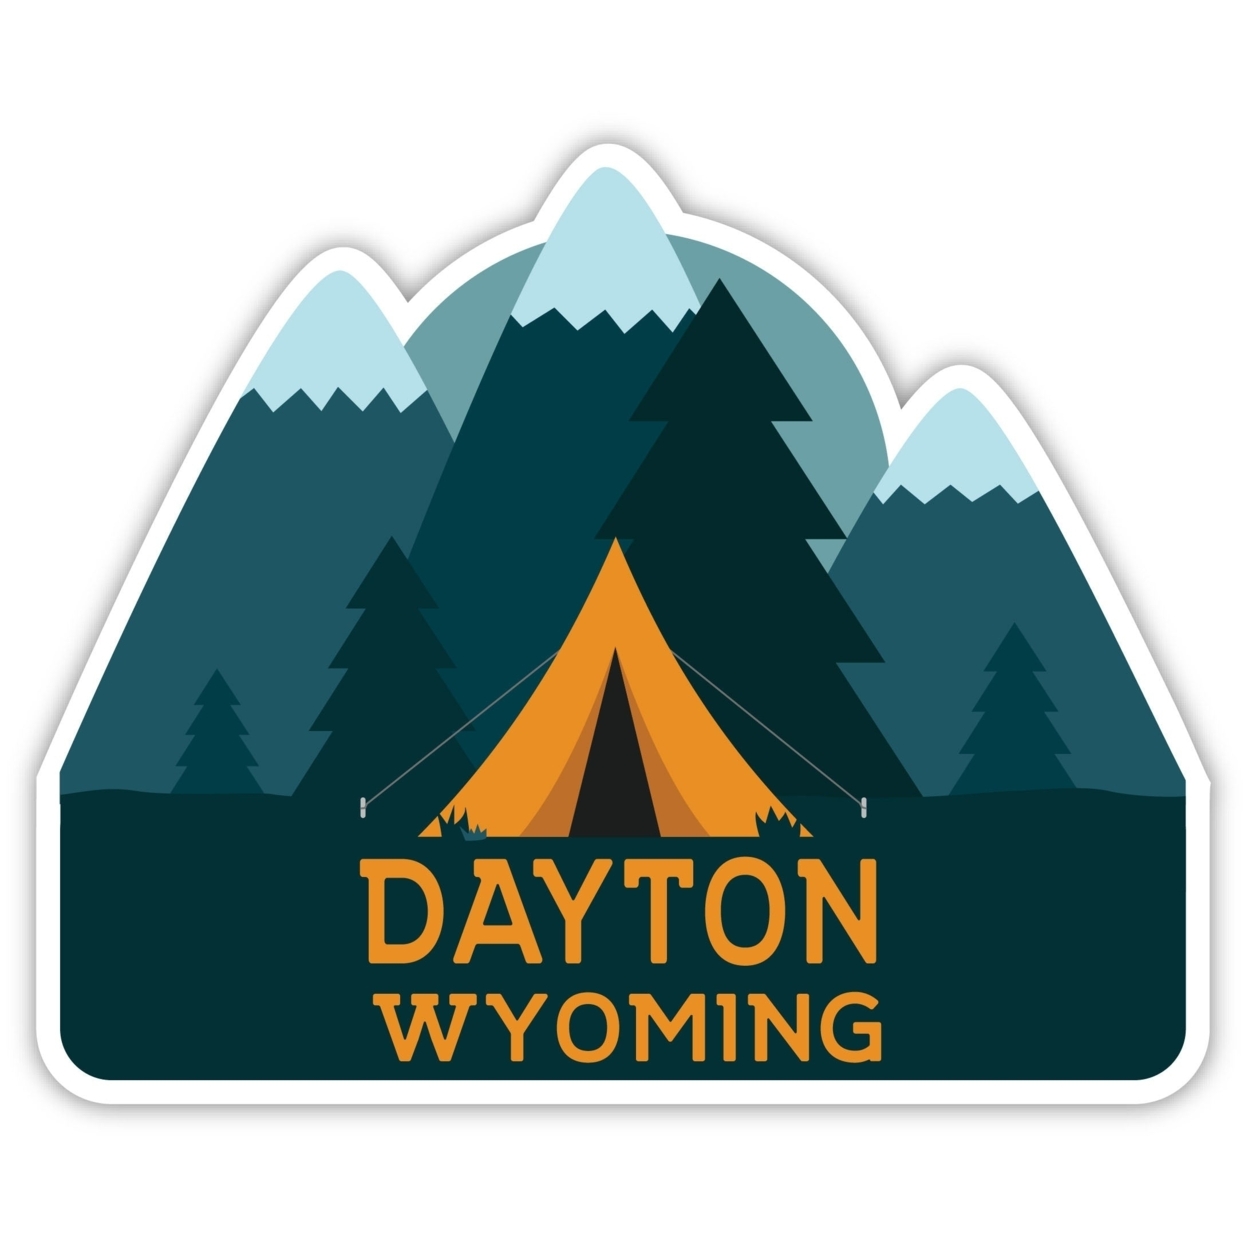 Dayton Wyoming Souvenir Decorative Stickers (Choose Theme And Size) - 4-Pack, 12-Inch, Tent